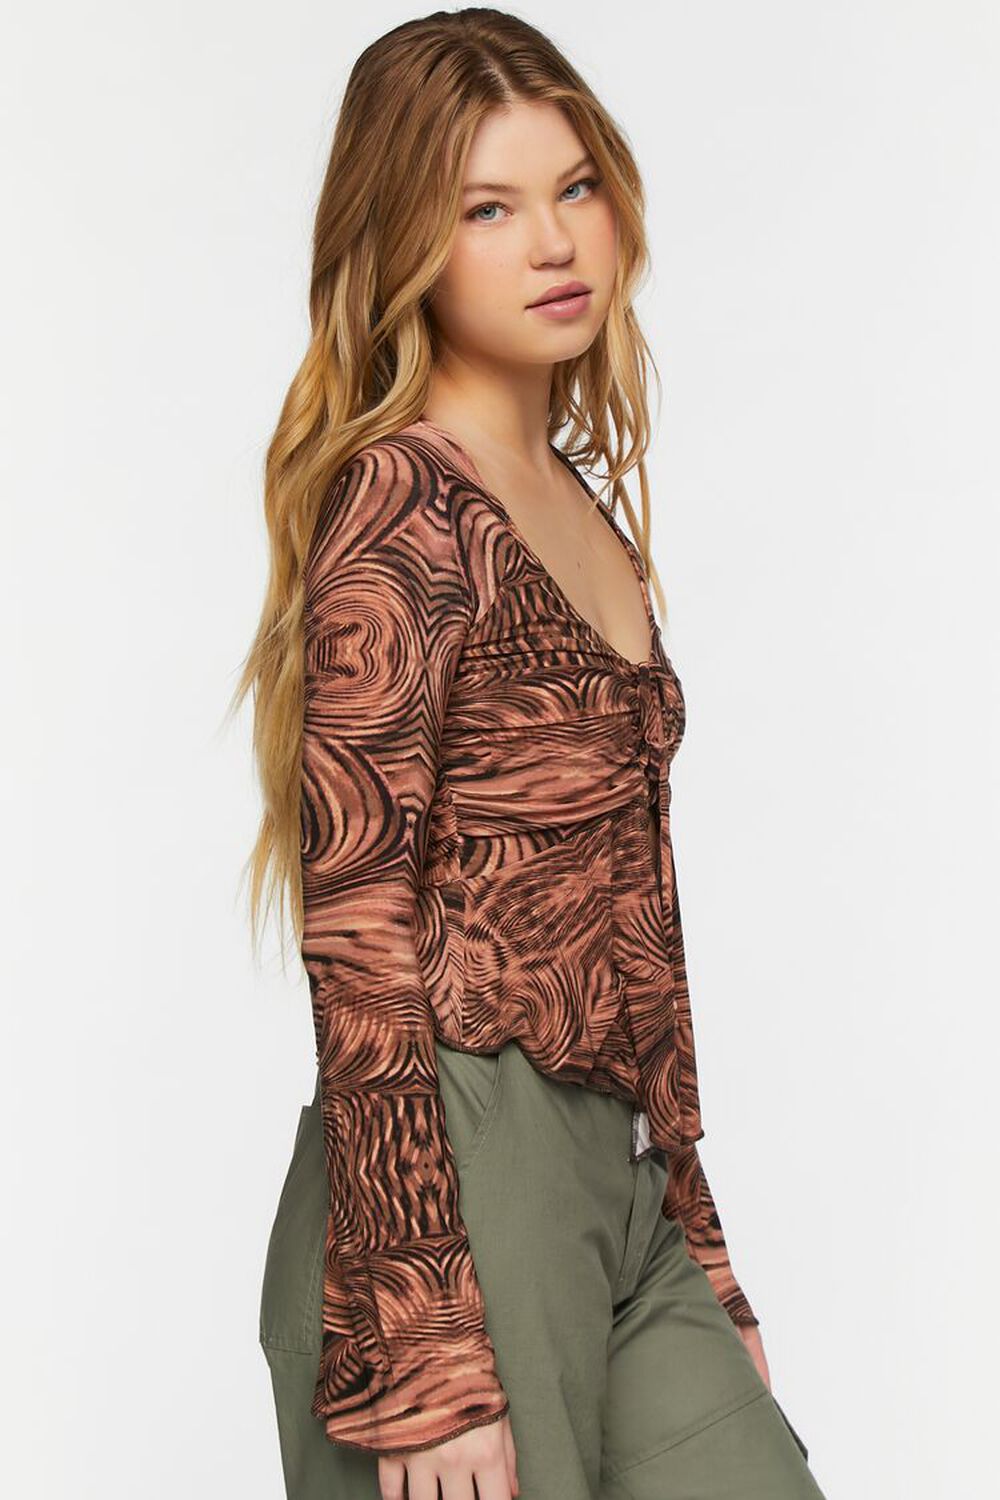 BROWN/MULTI Abstract Print Slinky Split-Front Top, image 2